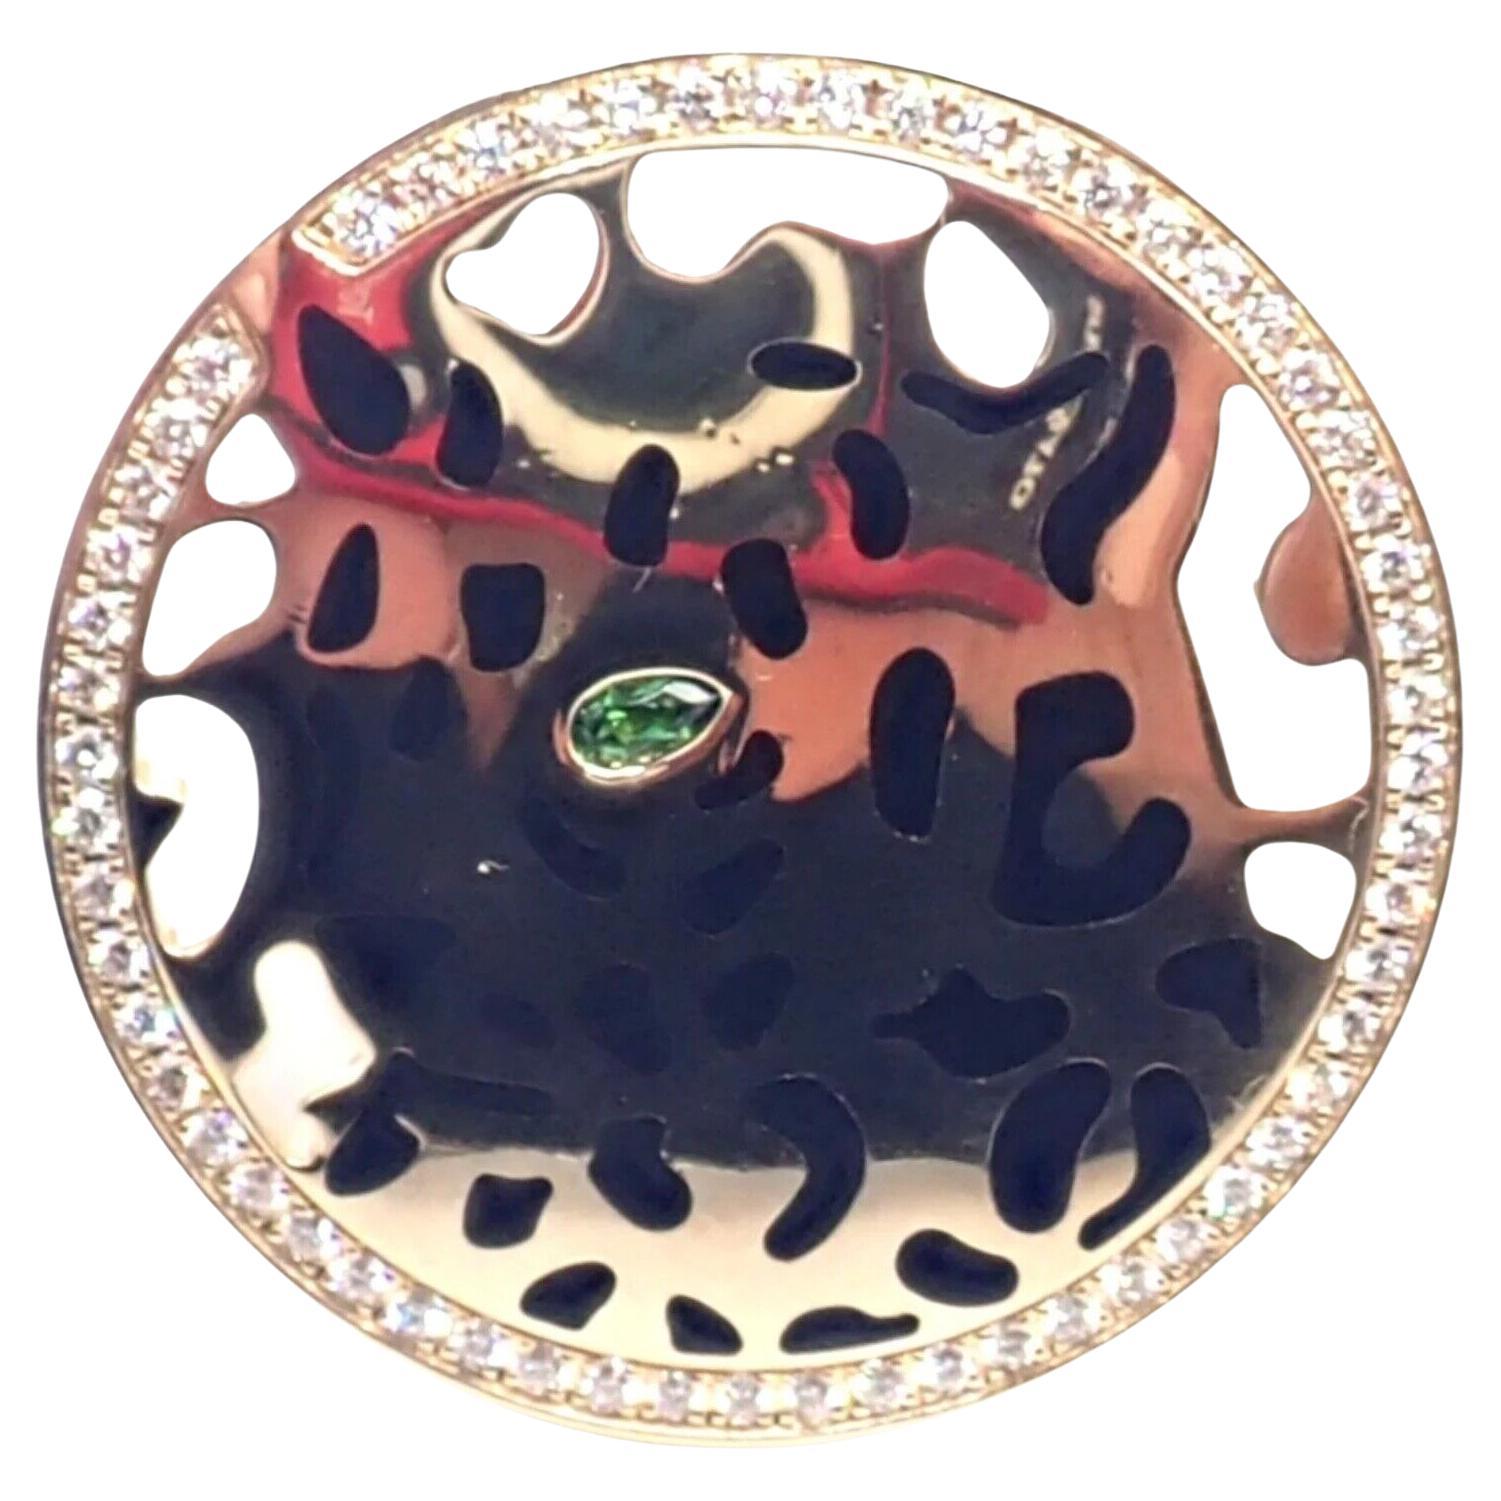 Cartier Panther Panthere Diamond Tsavorite Lacquer Yellow Gold Ring